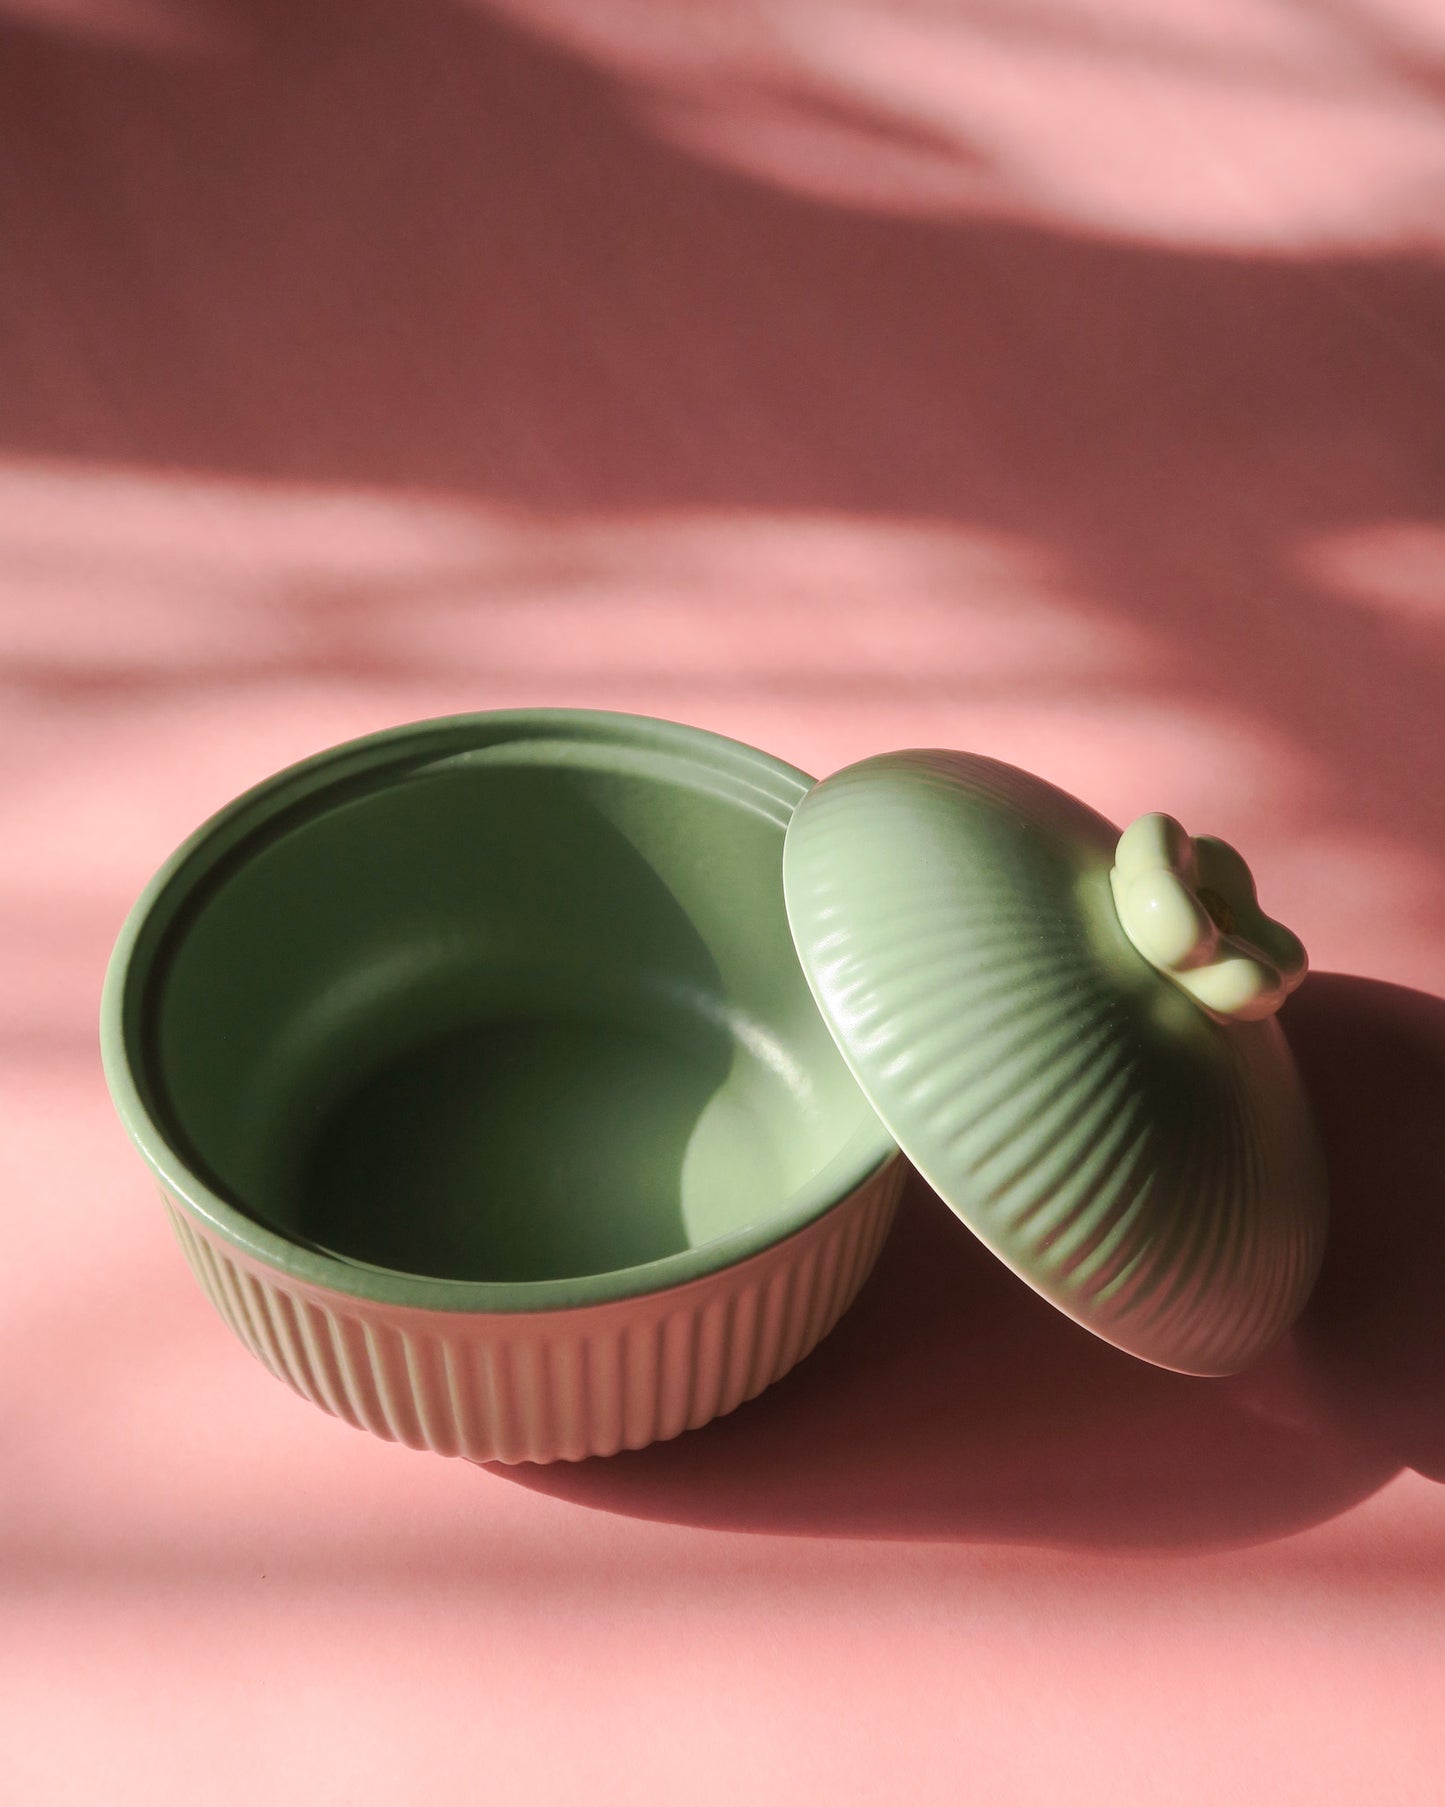 Bowl with Cover